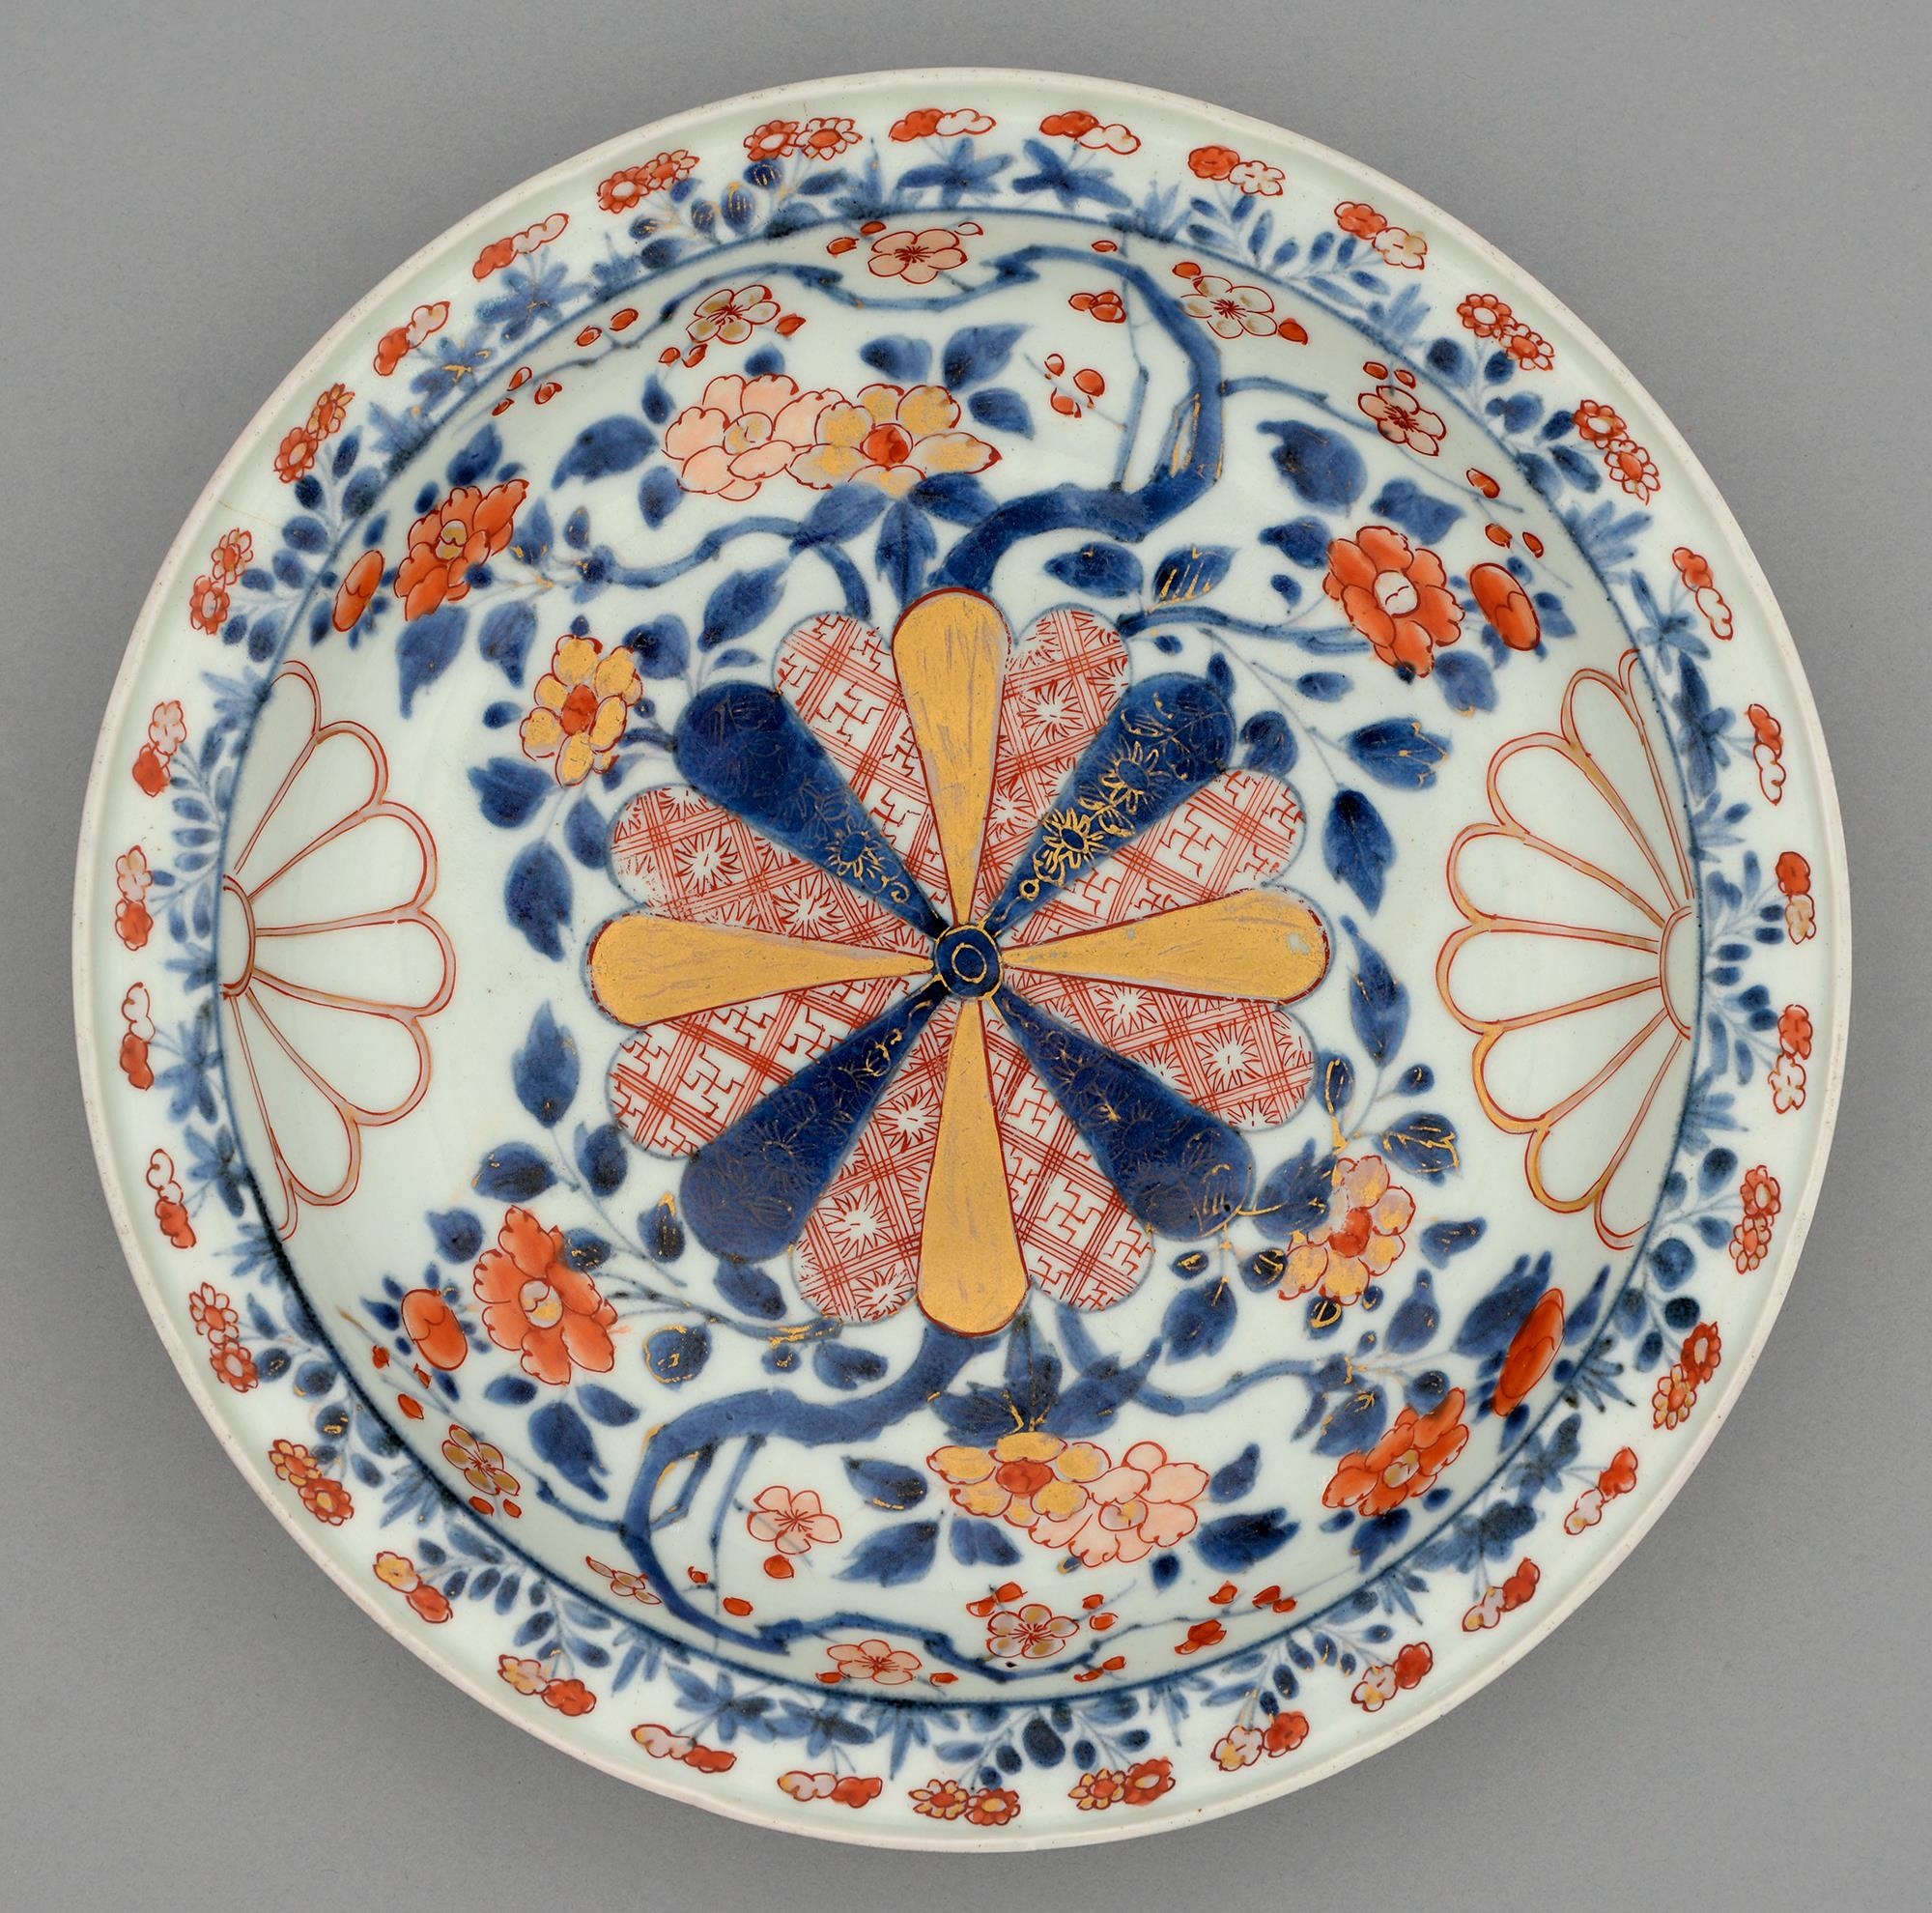 An Imari dish, Edo  period, early 18th c, with everted rim, painted in underglaze blue, red and gilt